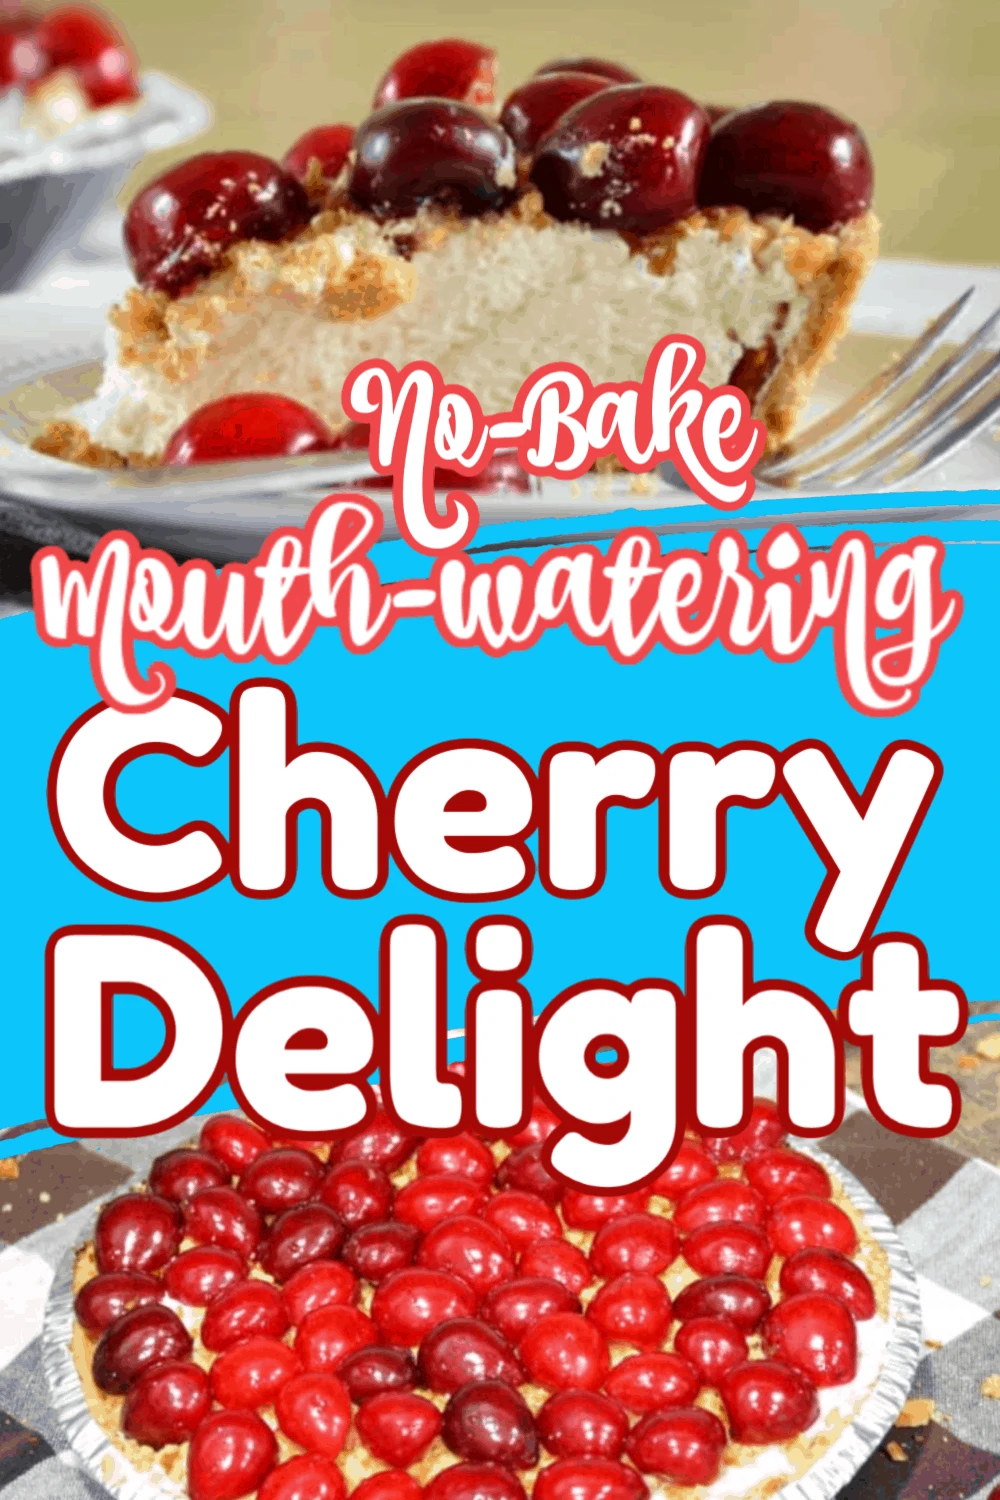 No-Bake, Mouth-Watering Cherry Delight Recipe